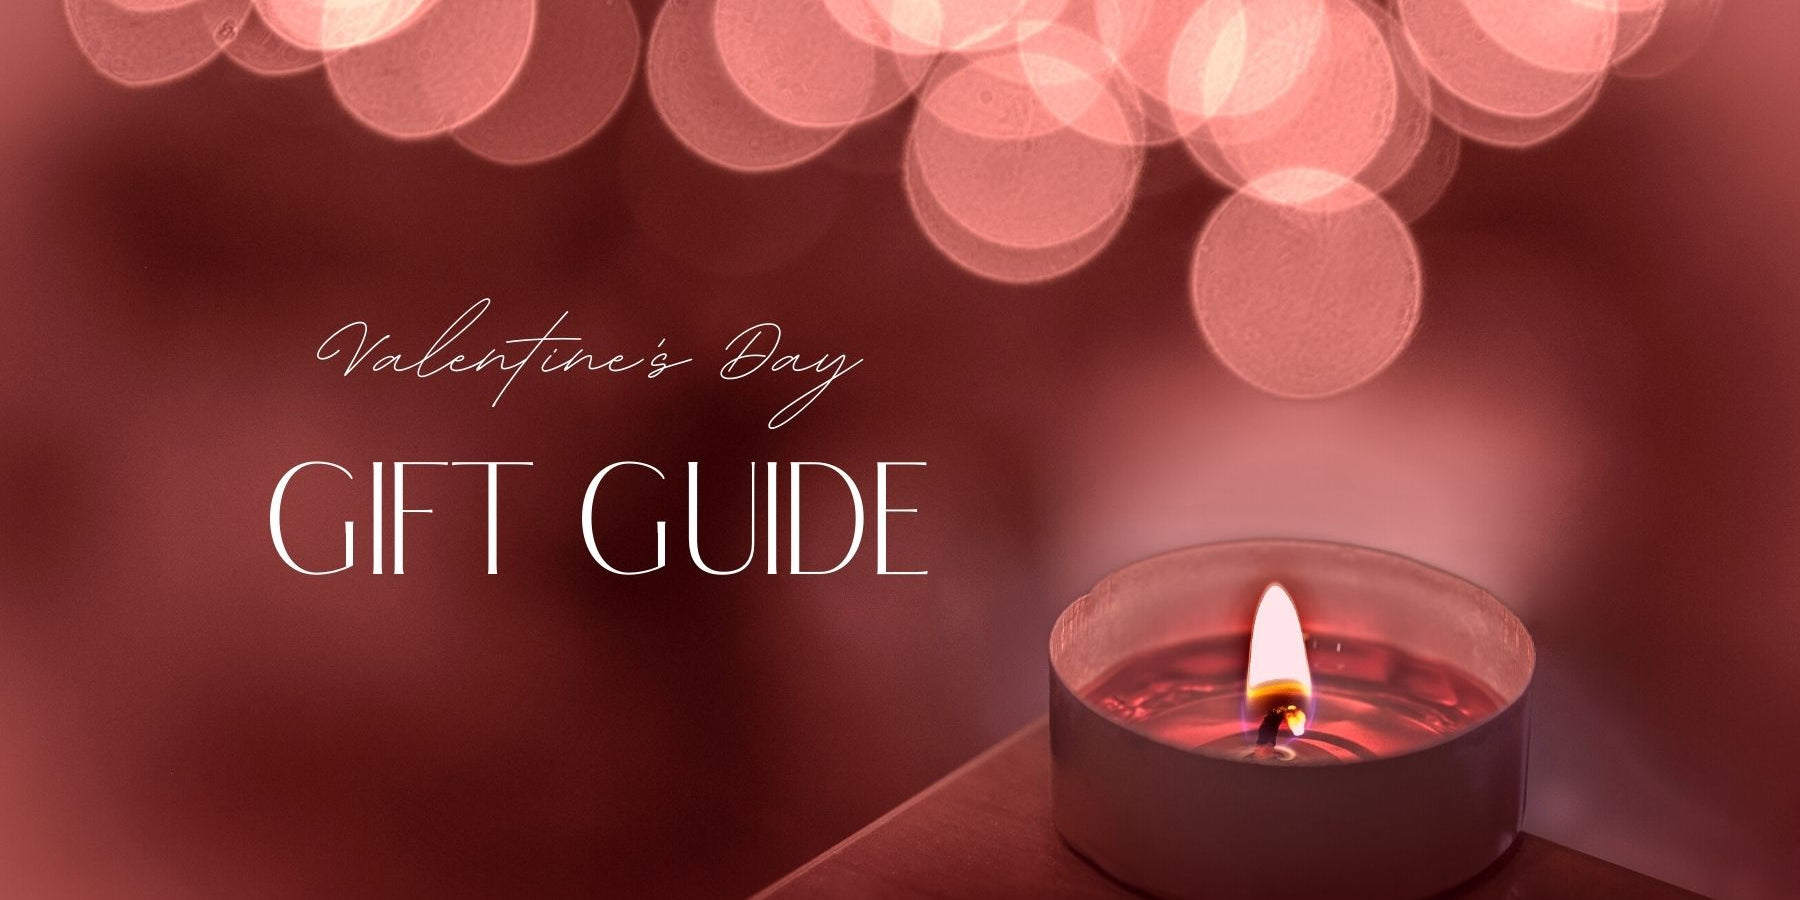 Valentine's Day Gift Guide: Perfect Gifts for a Romantic Date - Sexy Lingerie, Sex Toys, Couple Games